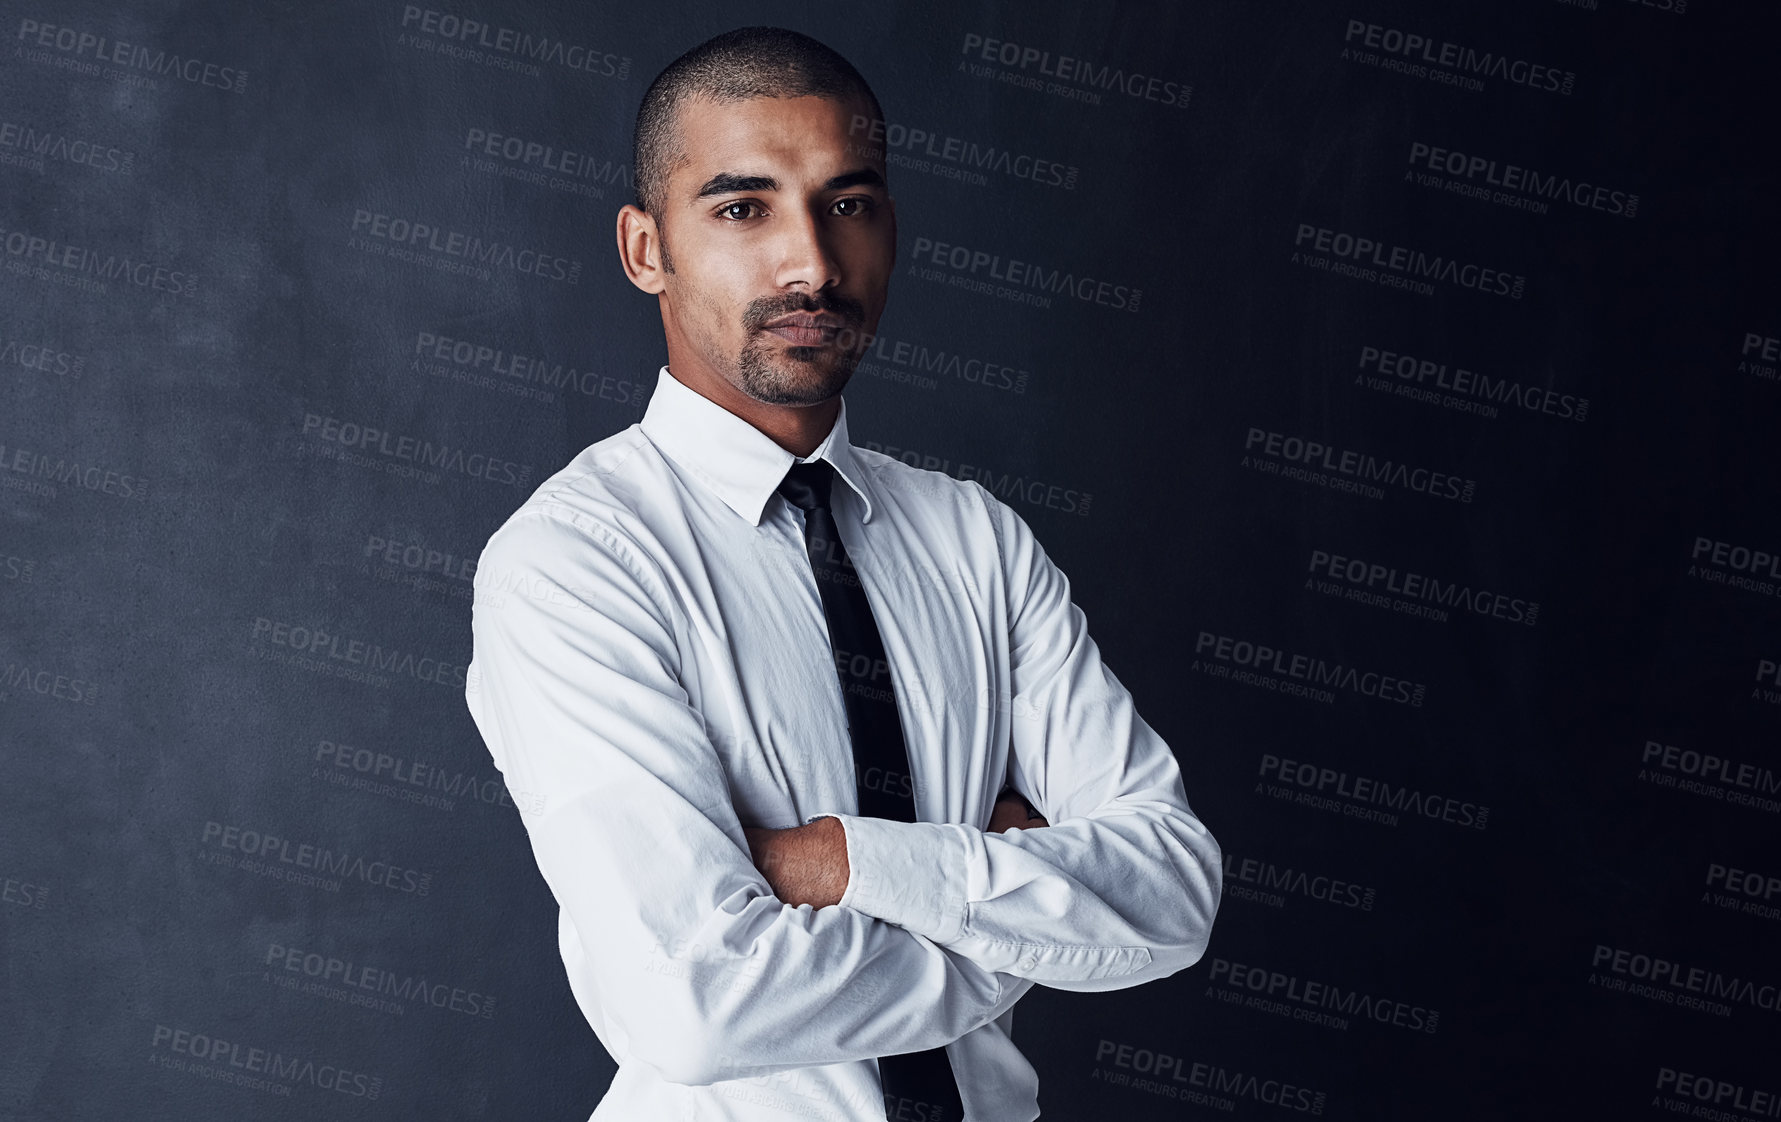 Buy stock photo Studio portrait of a confident young businessman against a dark background